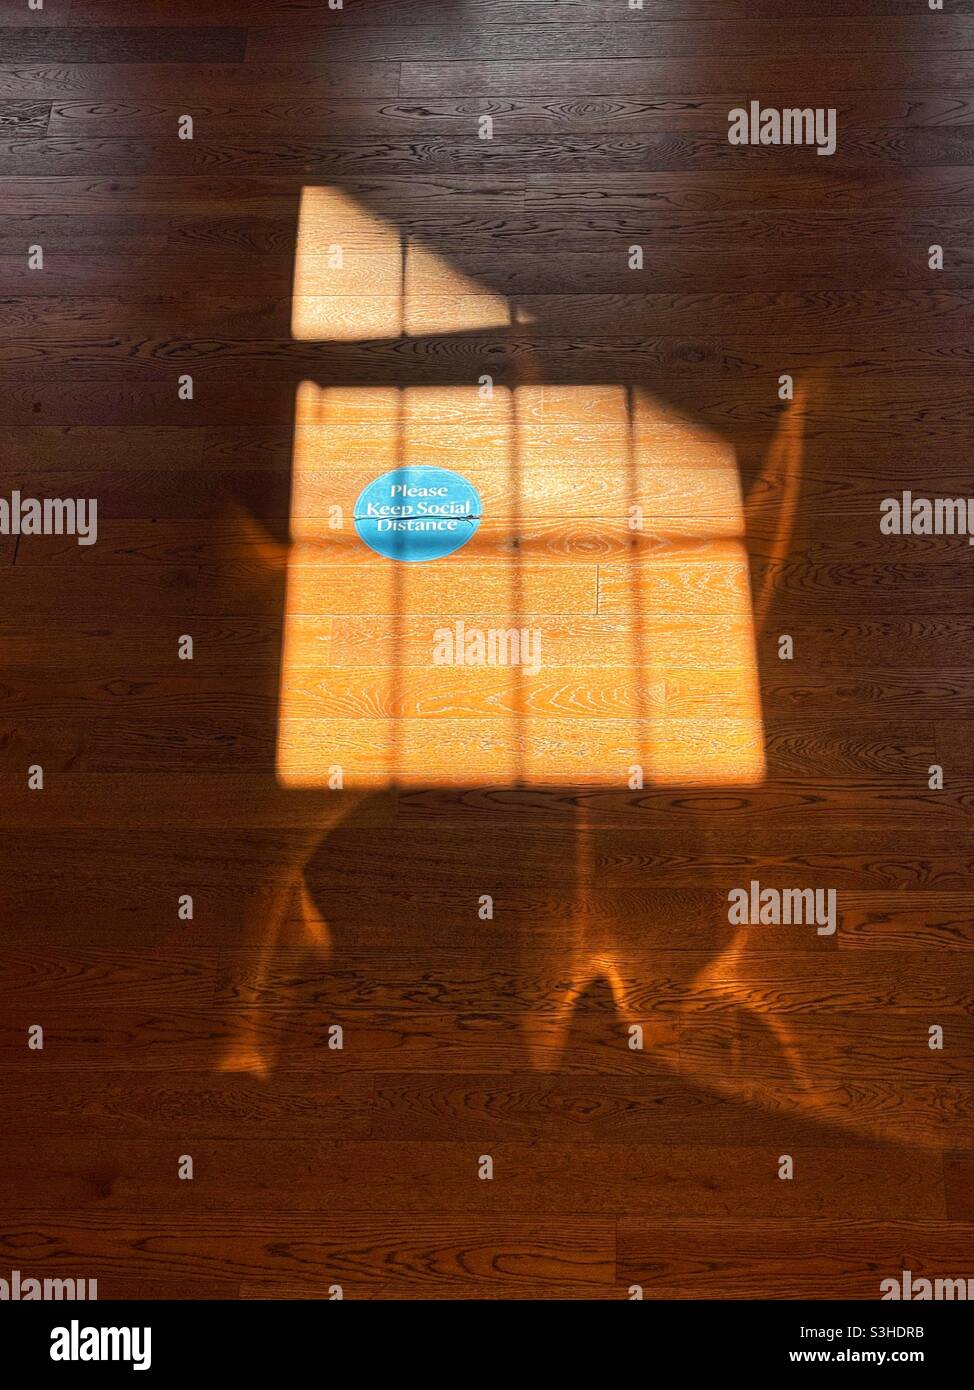 Social distancing sticker on a wooden floor lit by sunlight from a window frame Stock Photo